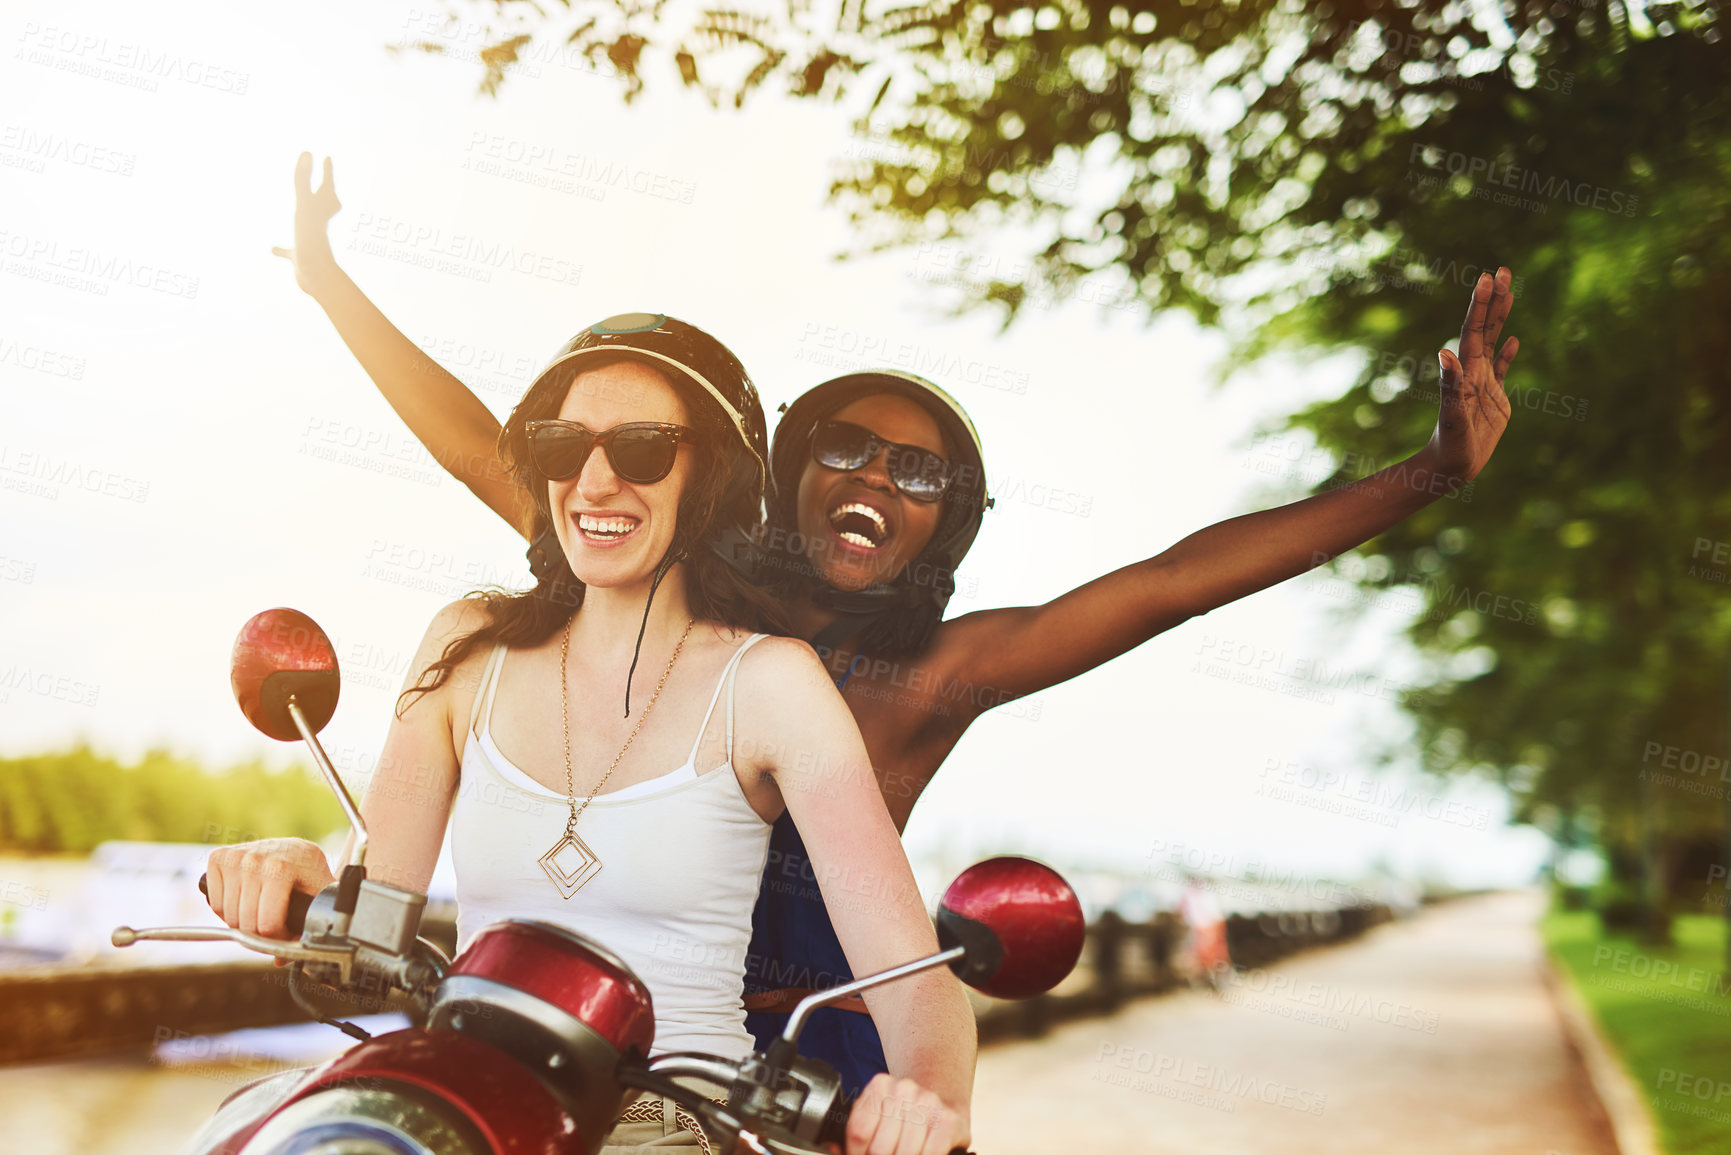 Buy stock photo Shot of two friends enjoying a ride on a scooter together